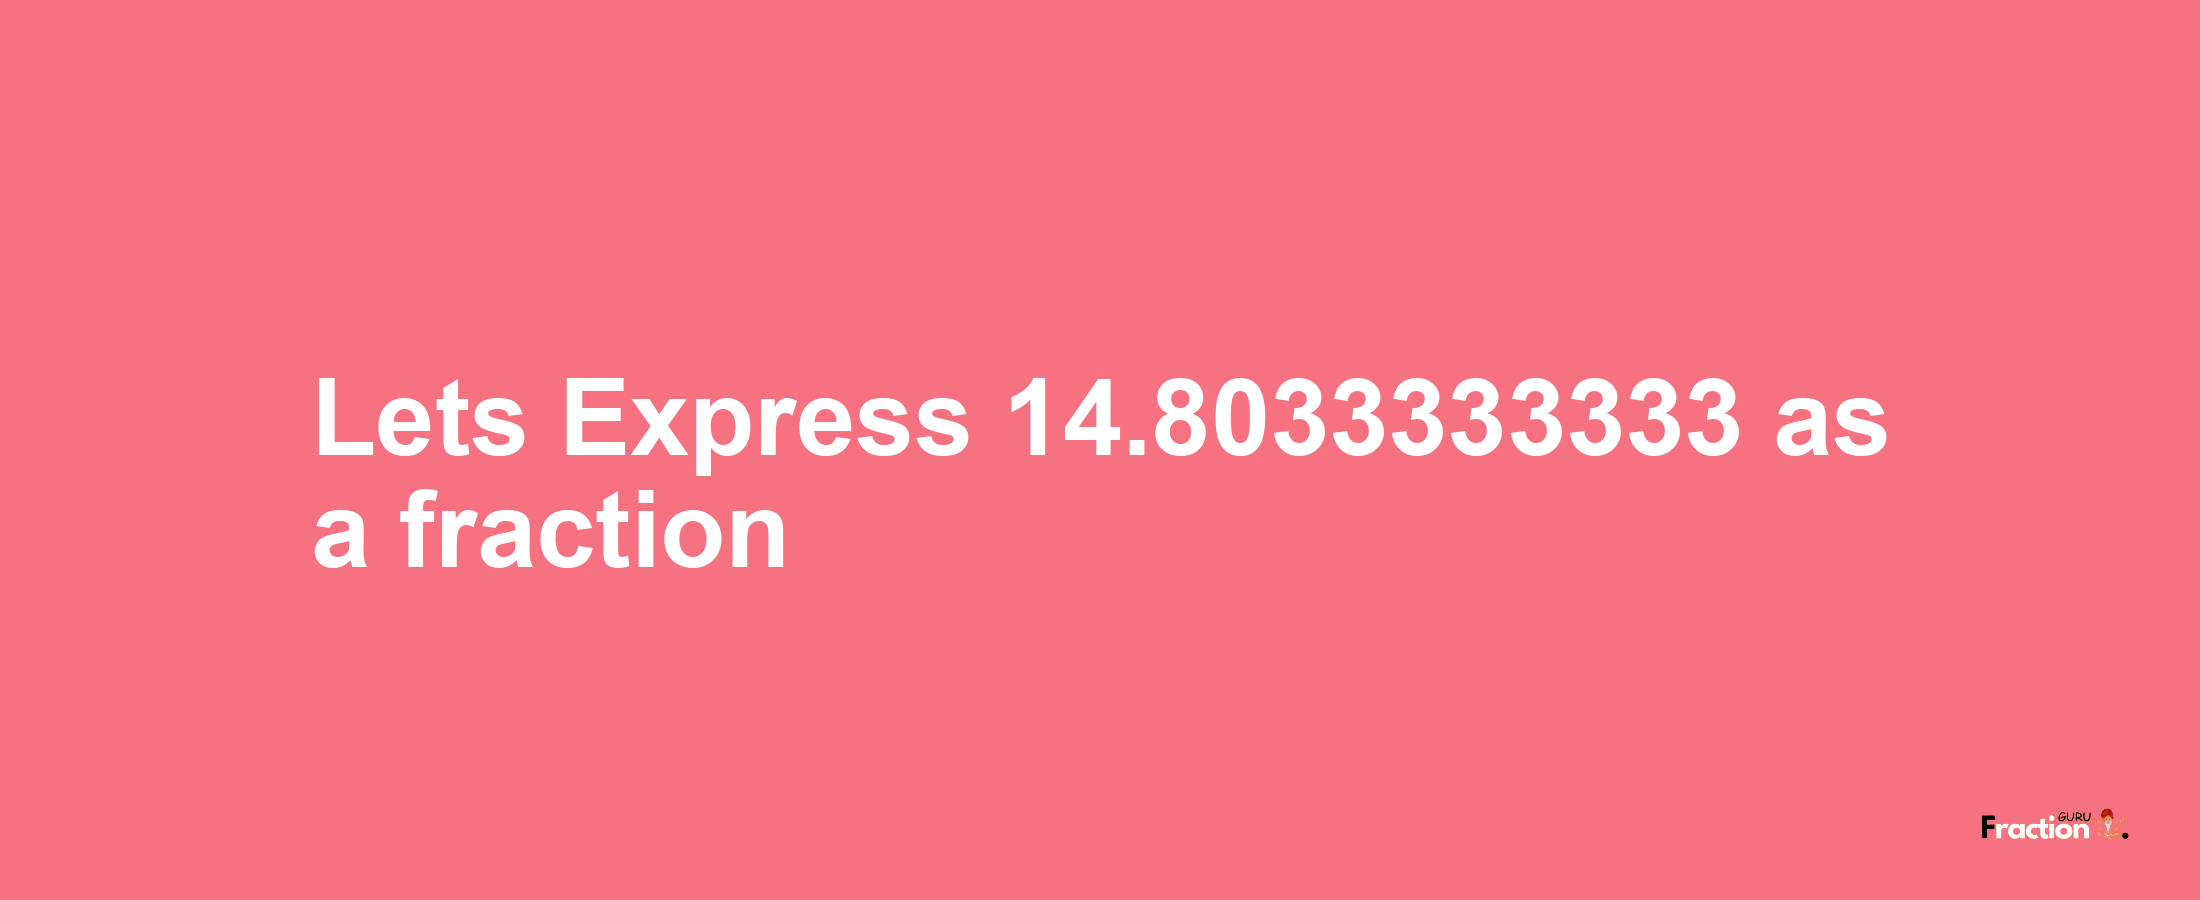 Lets Express 14.8033333333 as afraction